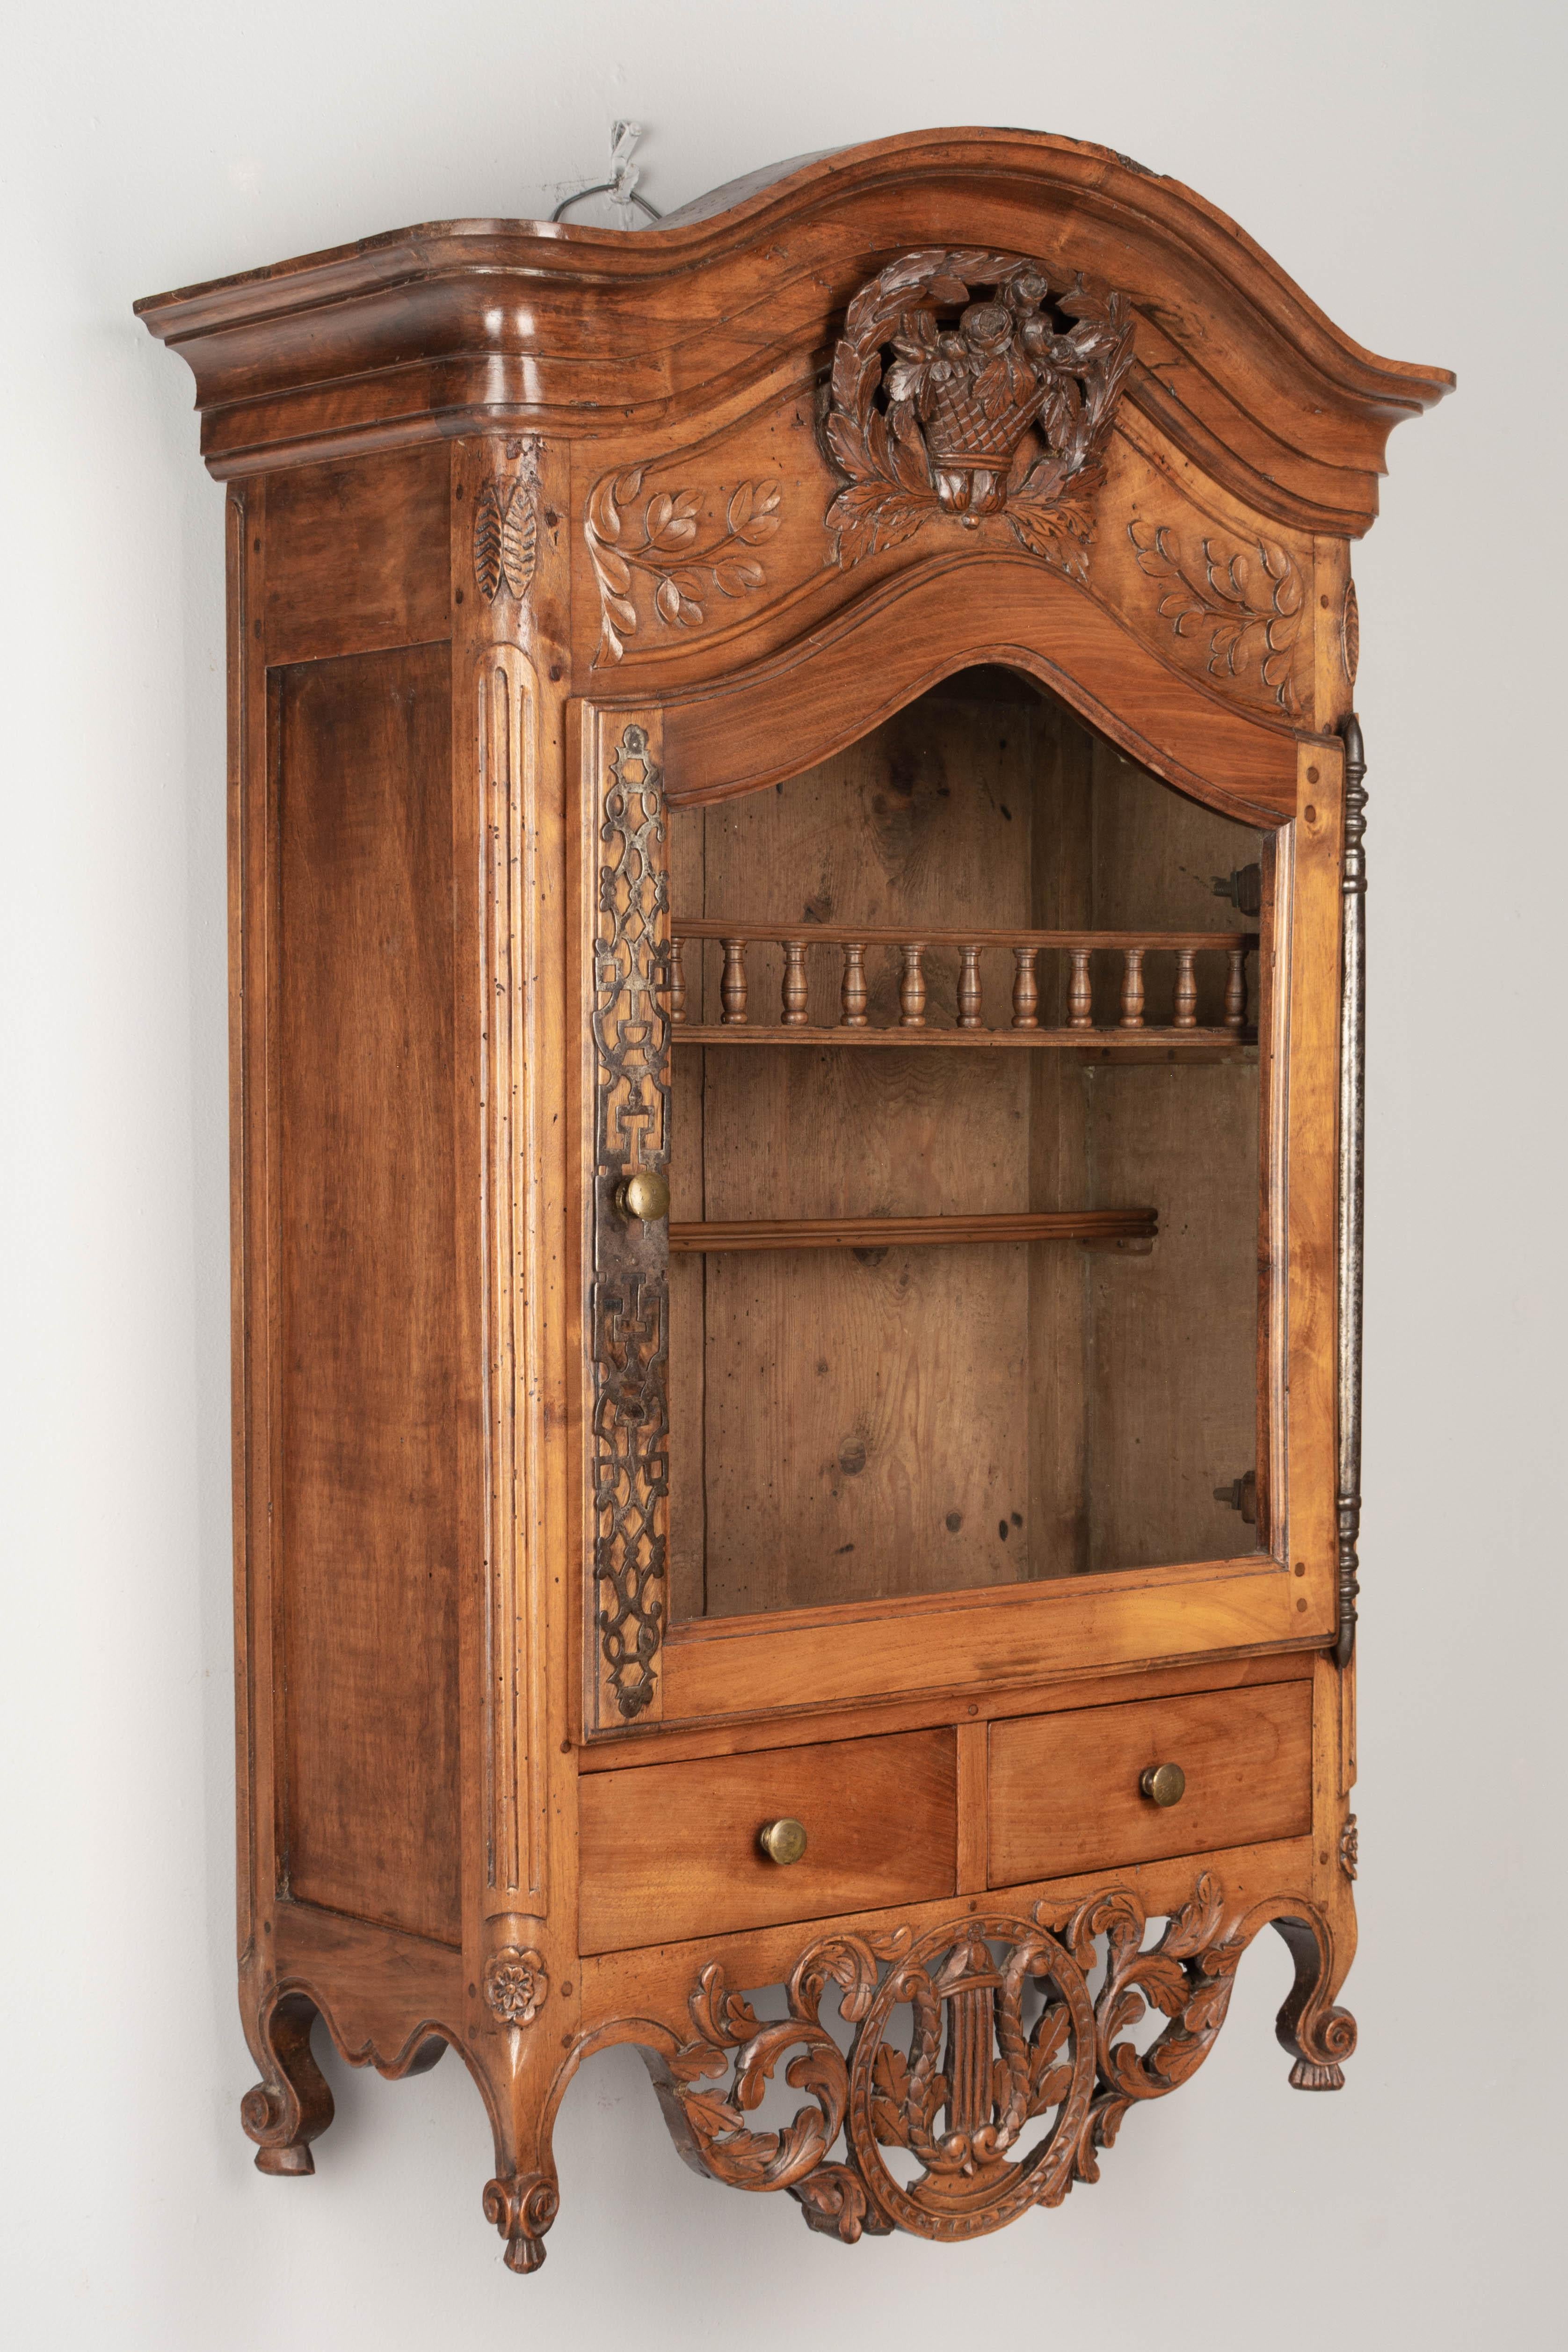 Louis XV 18th Century French Provencal Verrio or Wall Cabinet For Sale